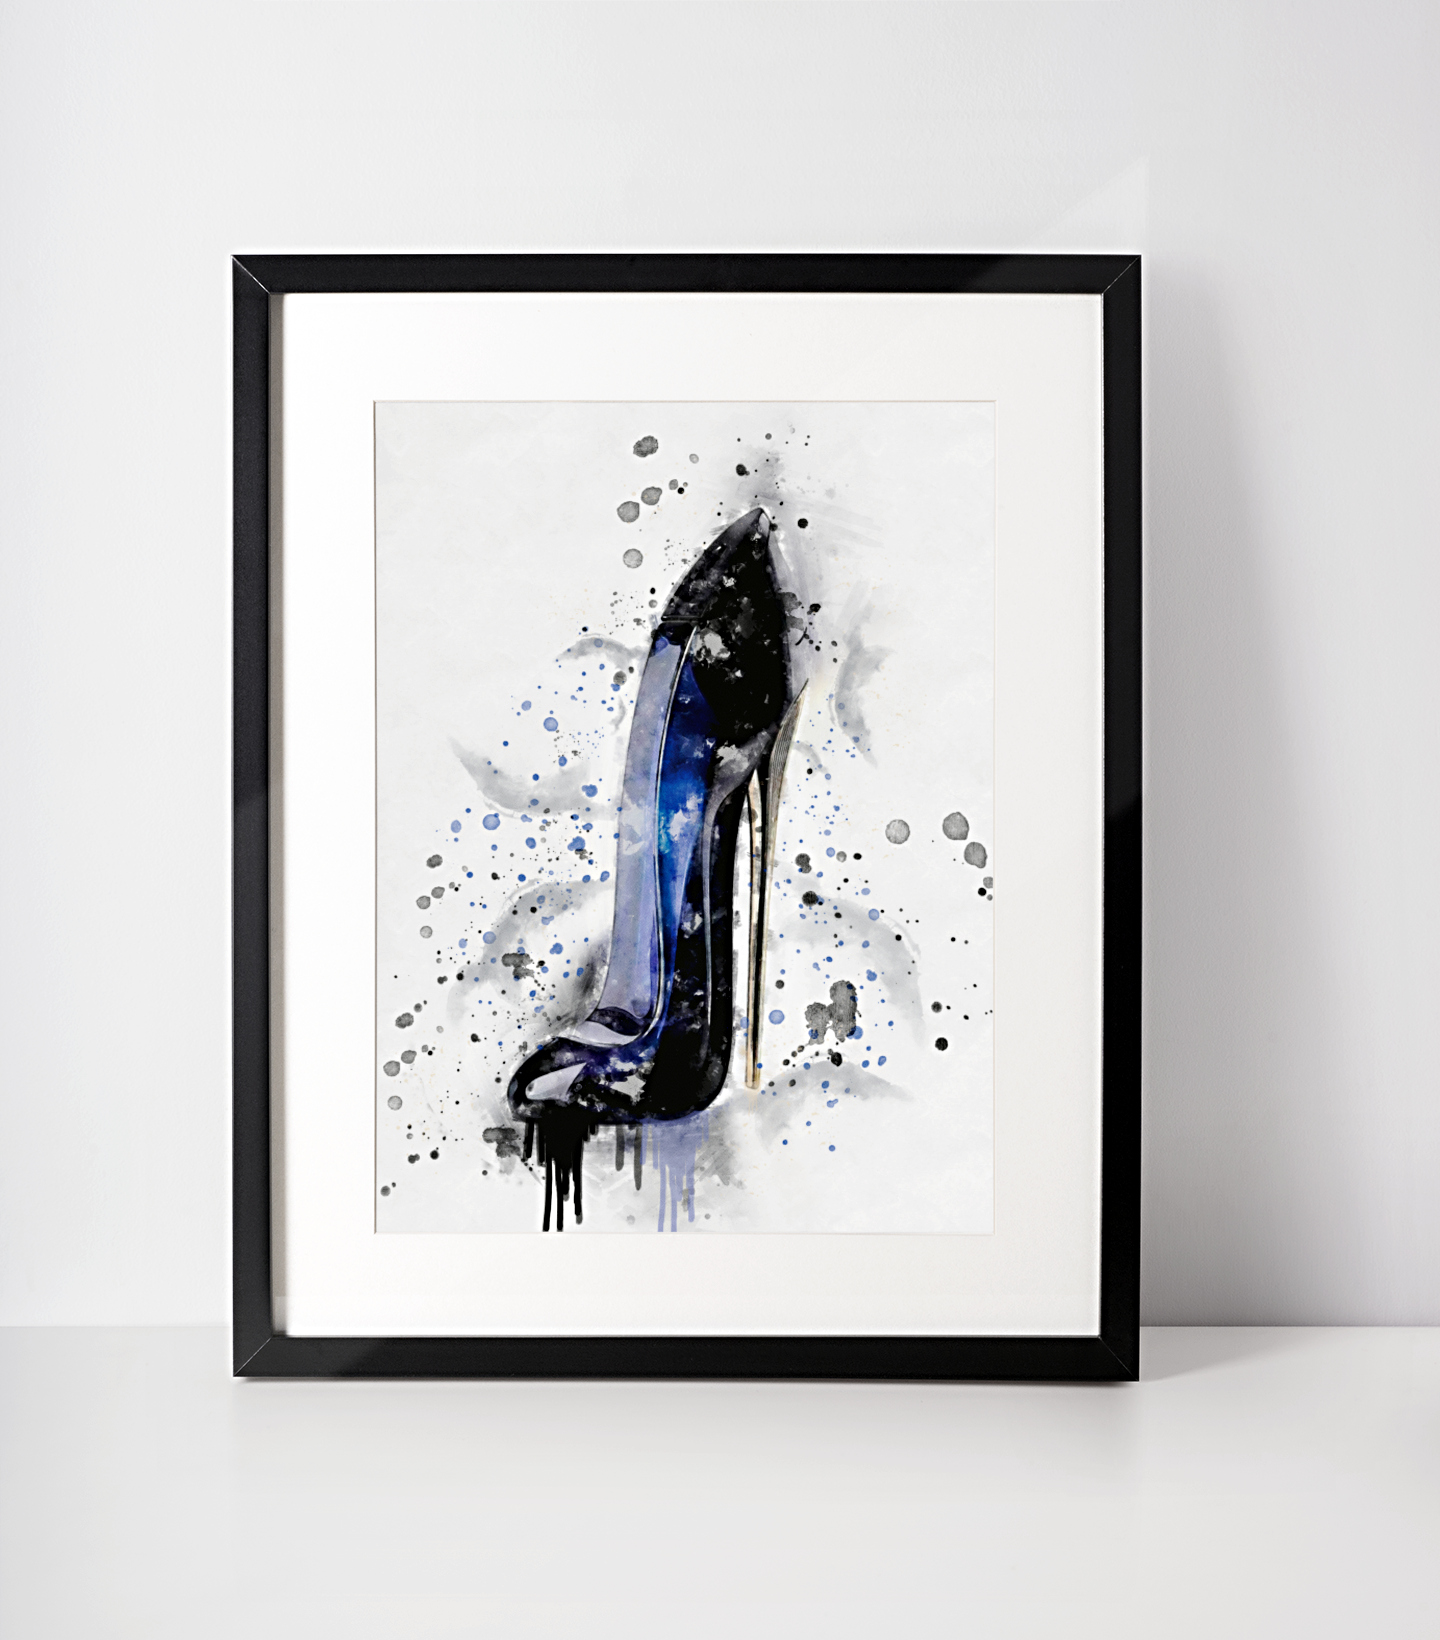 Stiletto Heel Shoe Wall Art Print- available in different sizes